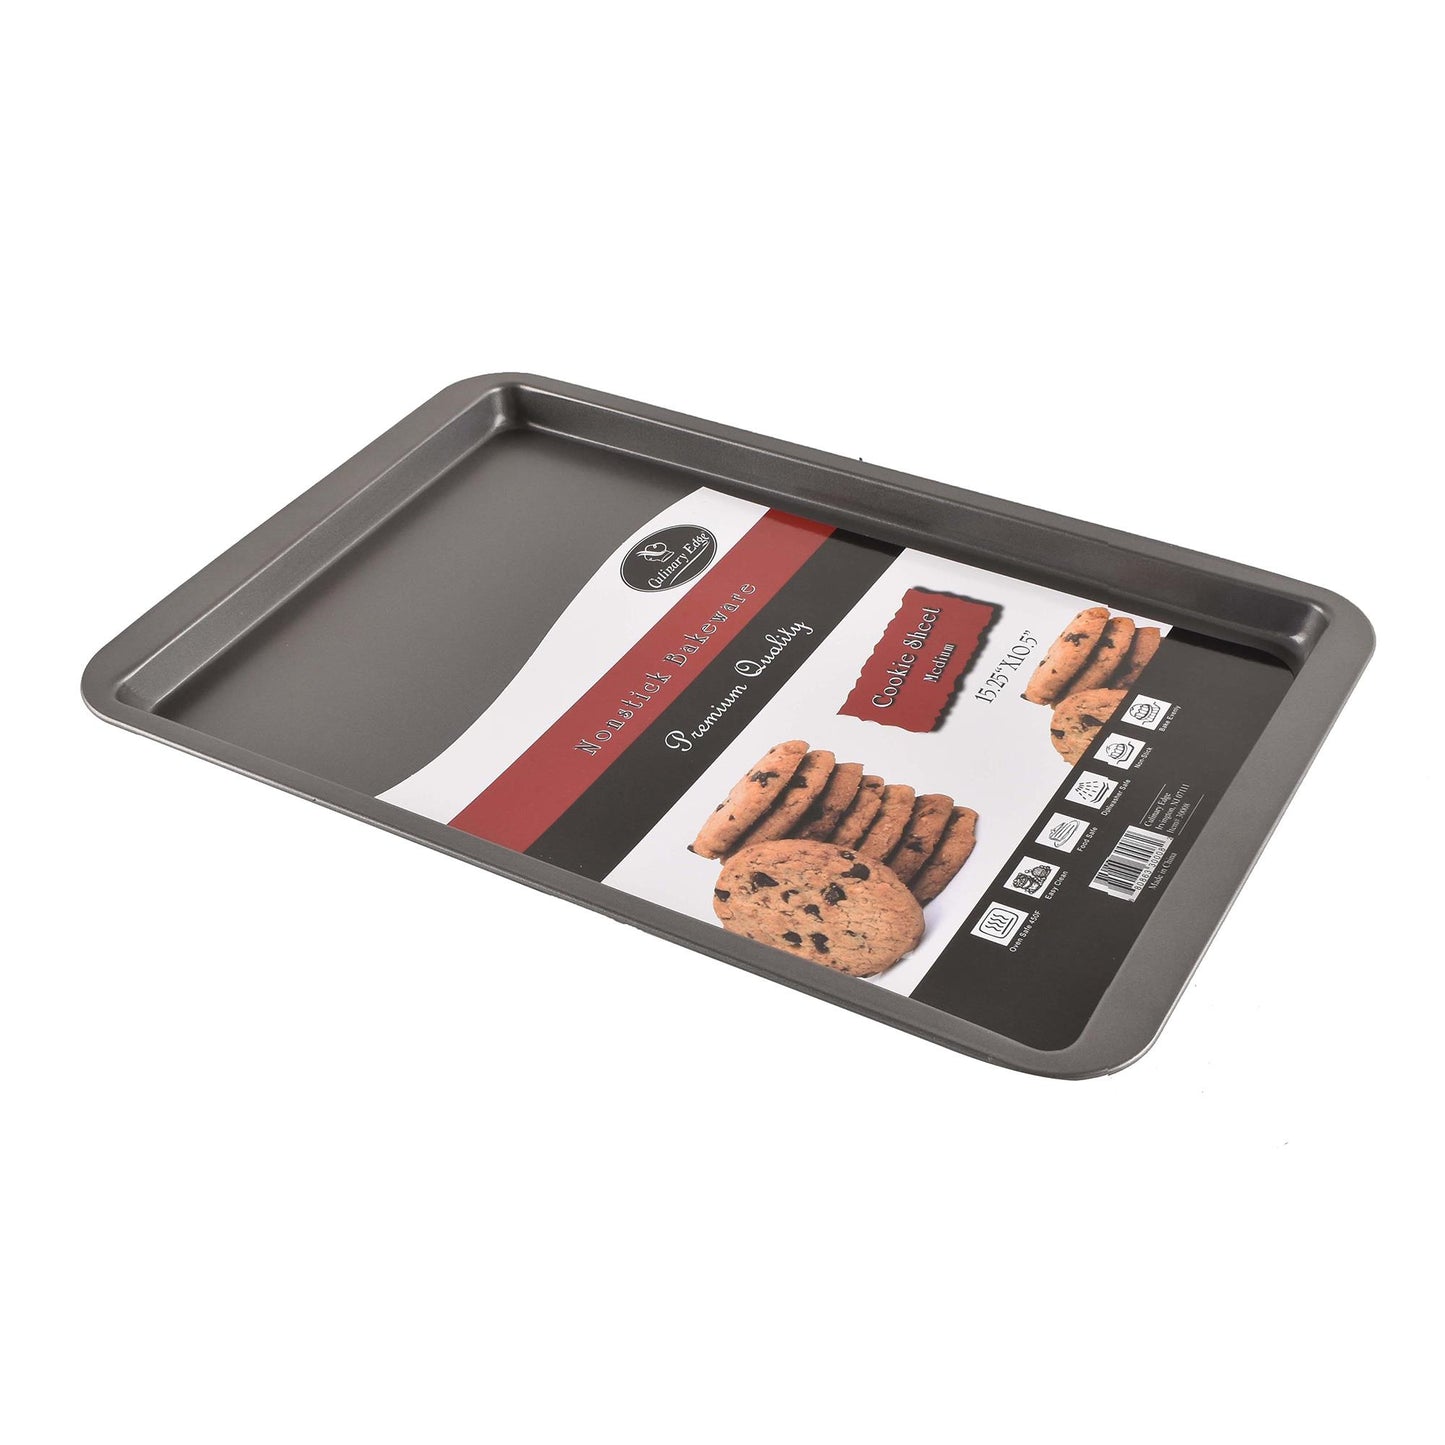 16.5 X 11.5 INCH COOKIE SHEET